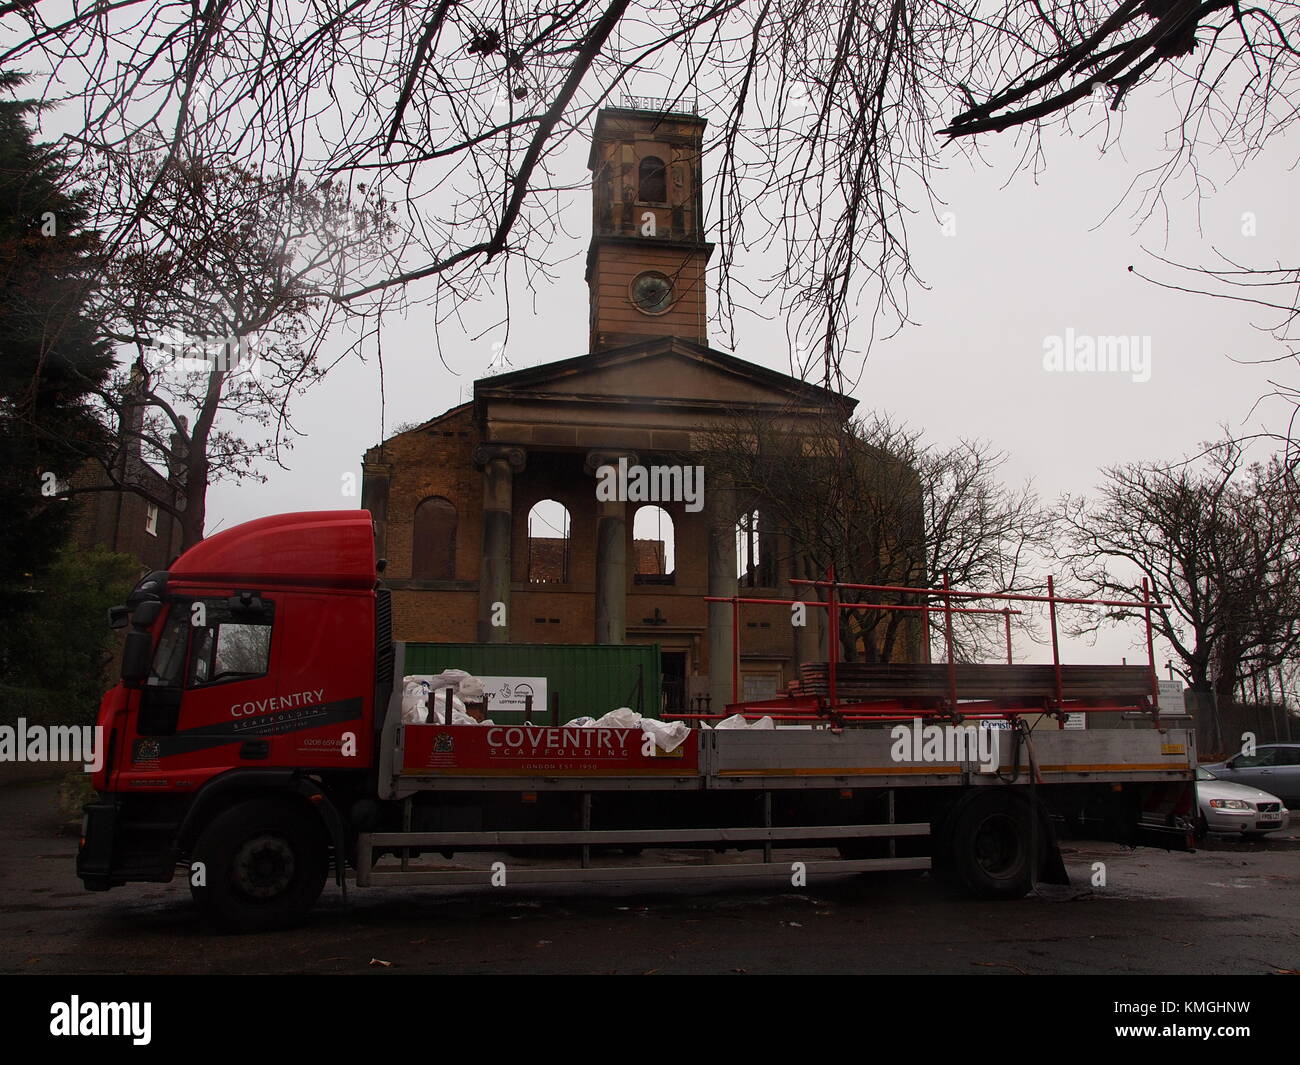 Sheerness, Kent, UK. 7th Dec, 2017. Sheerness Dockyard Church: emergency restoration work has started on this  groundbreaking Heritage Lottery Fund project with additional grants from Historic England. Sheerness Dockyard Trust (whose chairman is Will Palin, son of Michael Palin) aims to repair and transform the church, which stands at the entrance to the former Royal Dockyard on the Isle of Sheppey. The church was badly damaged by fire in 2001 - it's an architectural masterpiece and one of the most important buildings at risk in the South East. Credit: James Bell/Alamy Live News Stock Photo